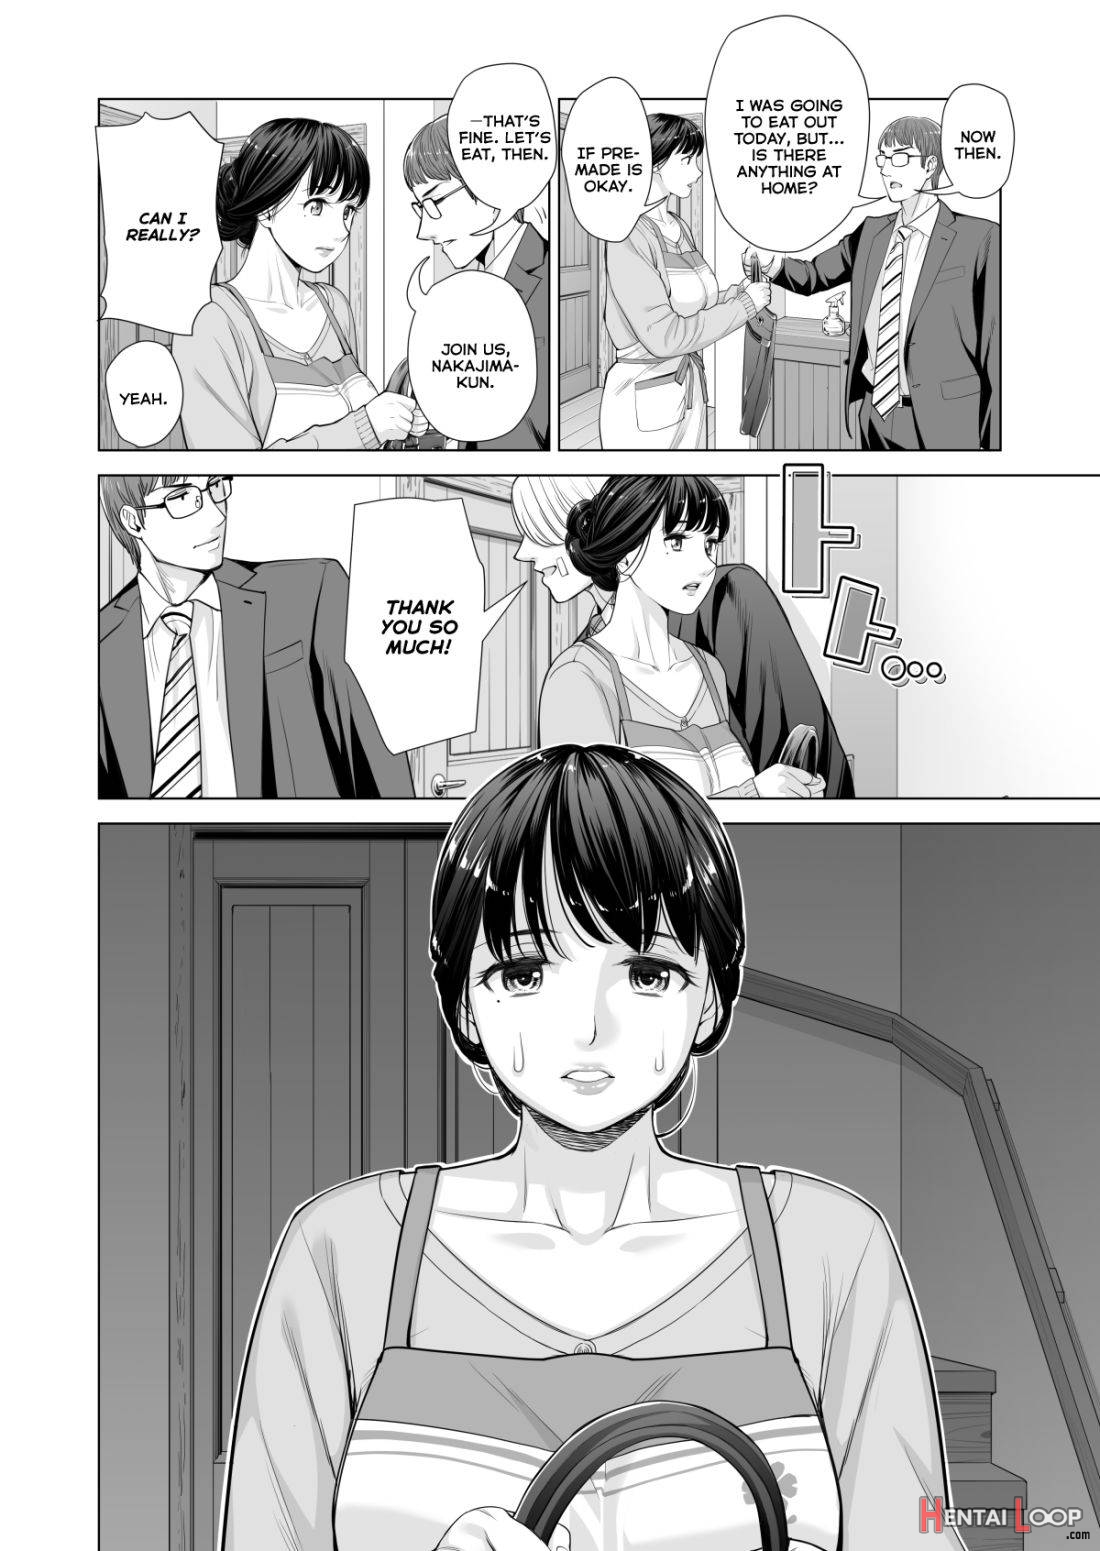 Tsukiyo no Midare Zake (Kouhen) Moonlit Intoxication ~ A Housewife Stolen by a Coworker Besides her Blackout Drunk Husband ~ Chapter 2 page 28